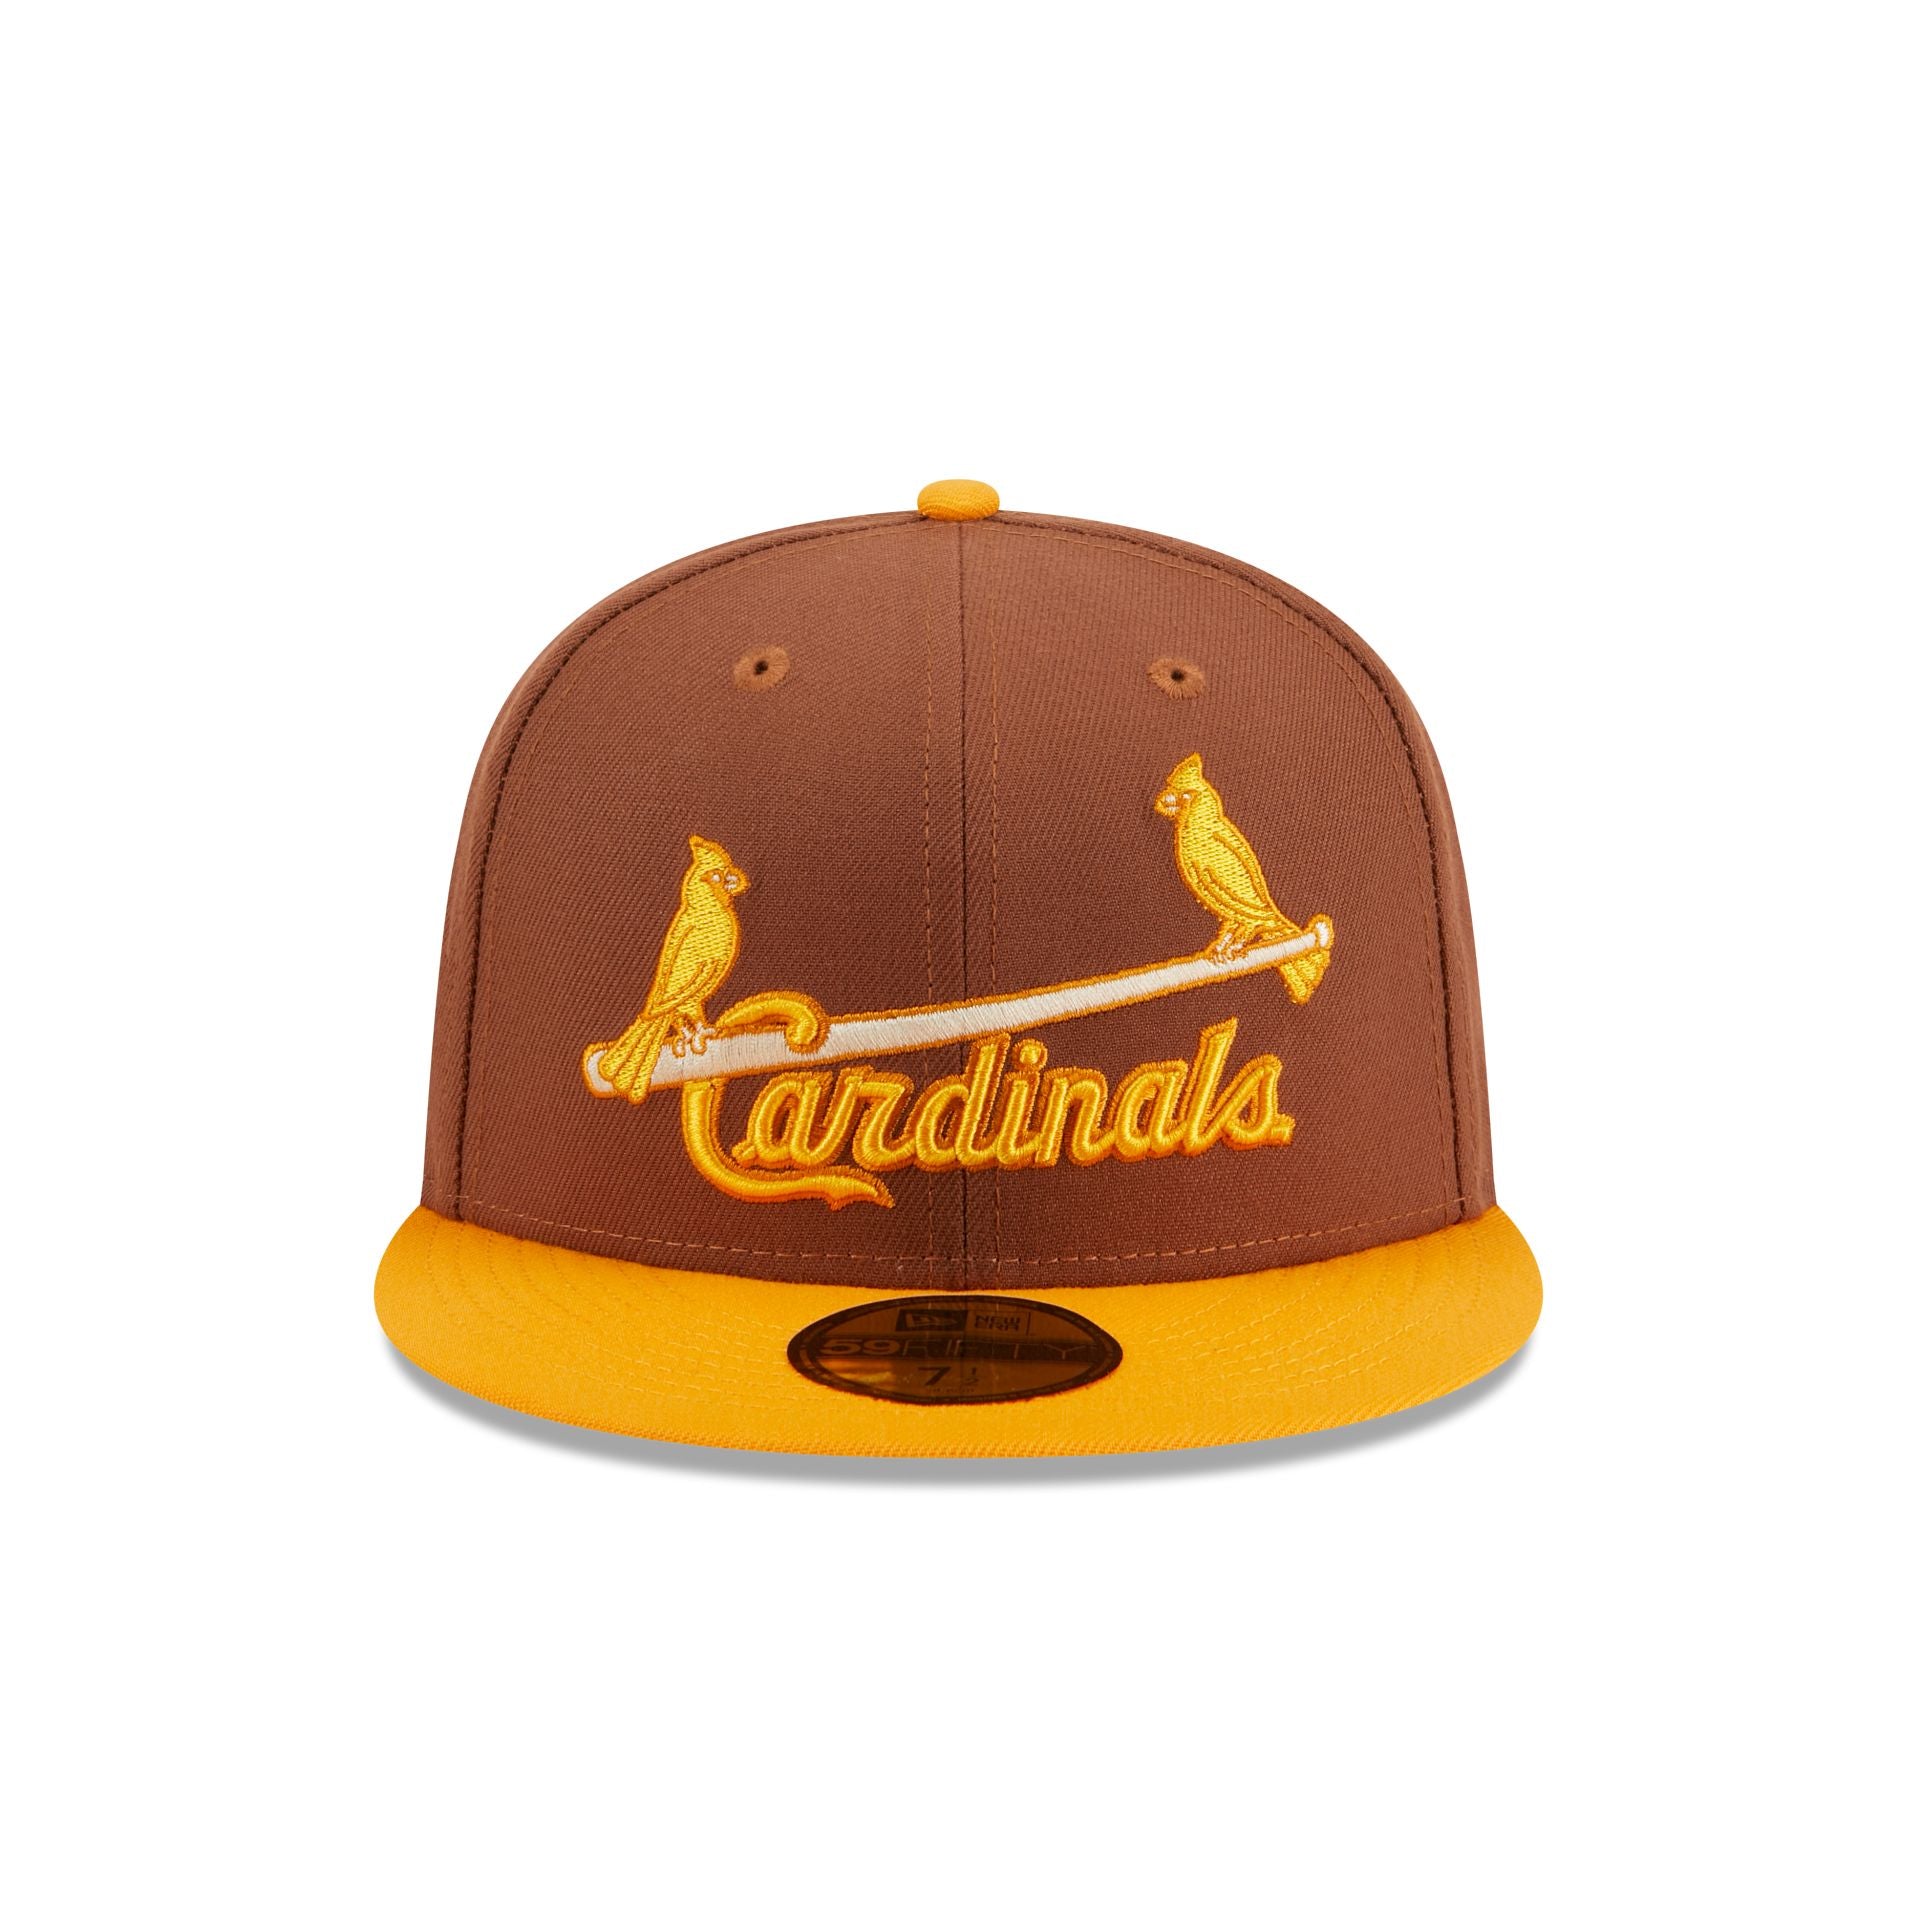 St. Louis Cardinals New Era 59FIFTY Fitted Hat - Black/Gold